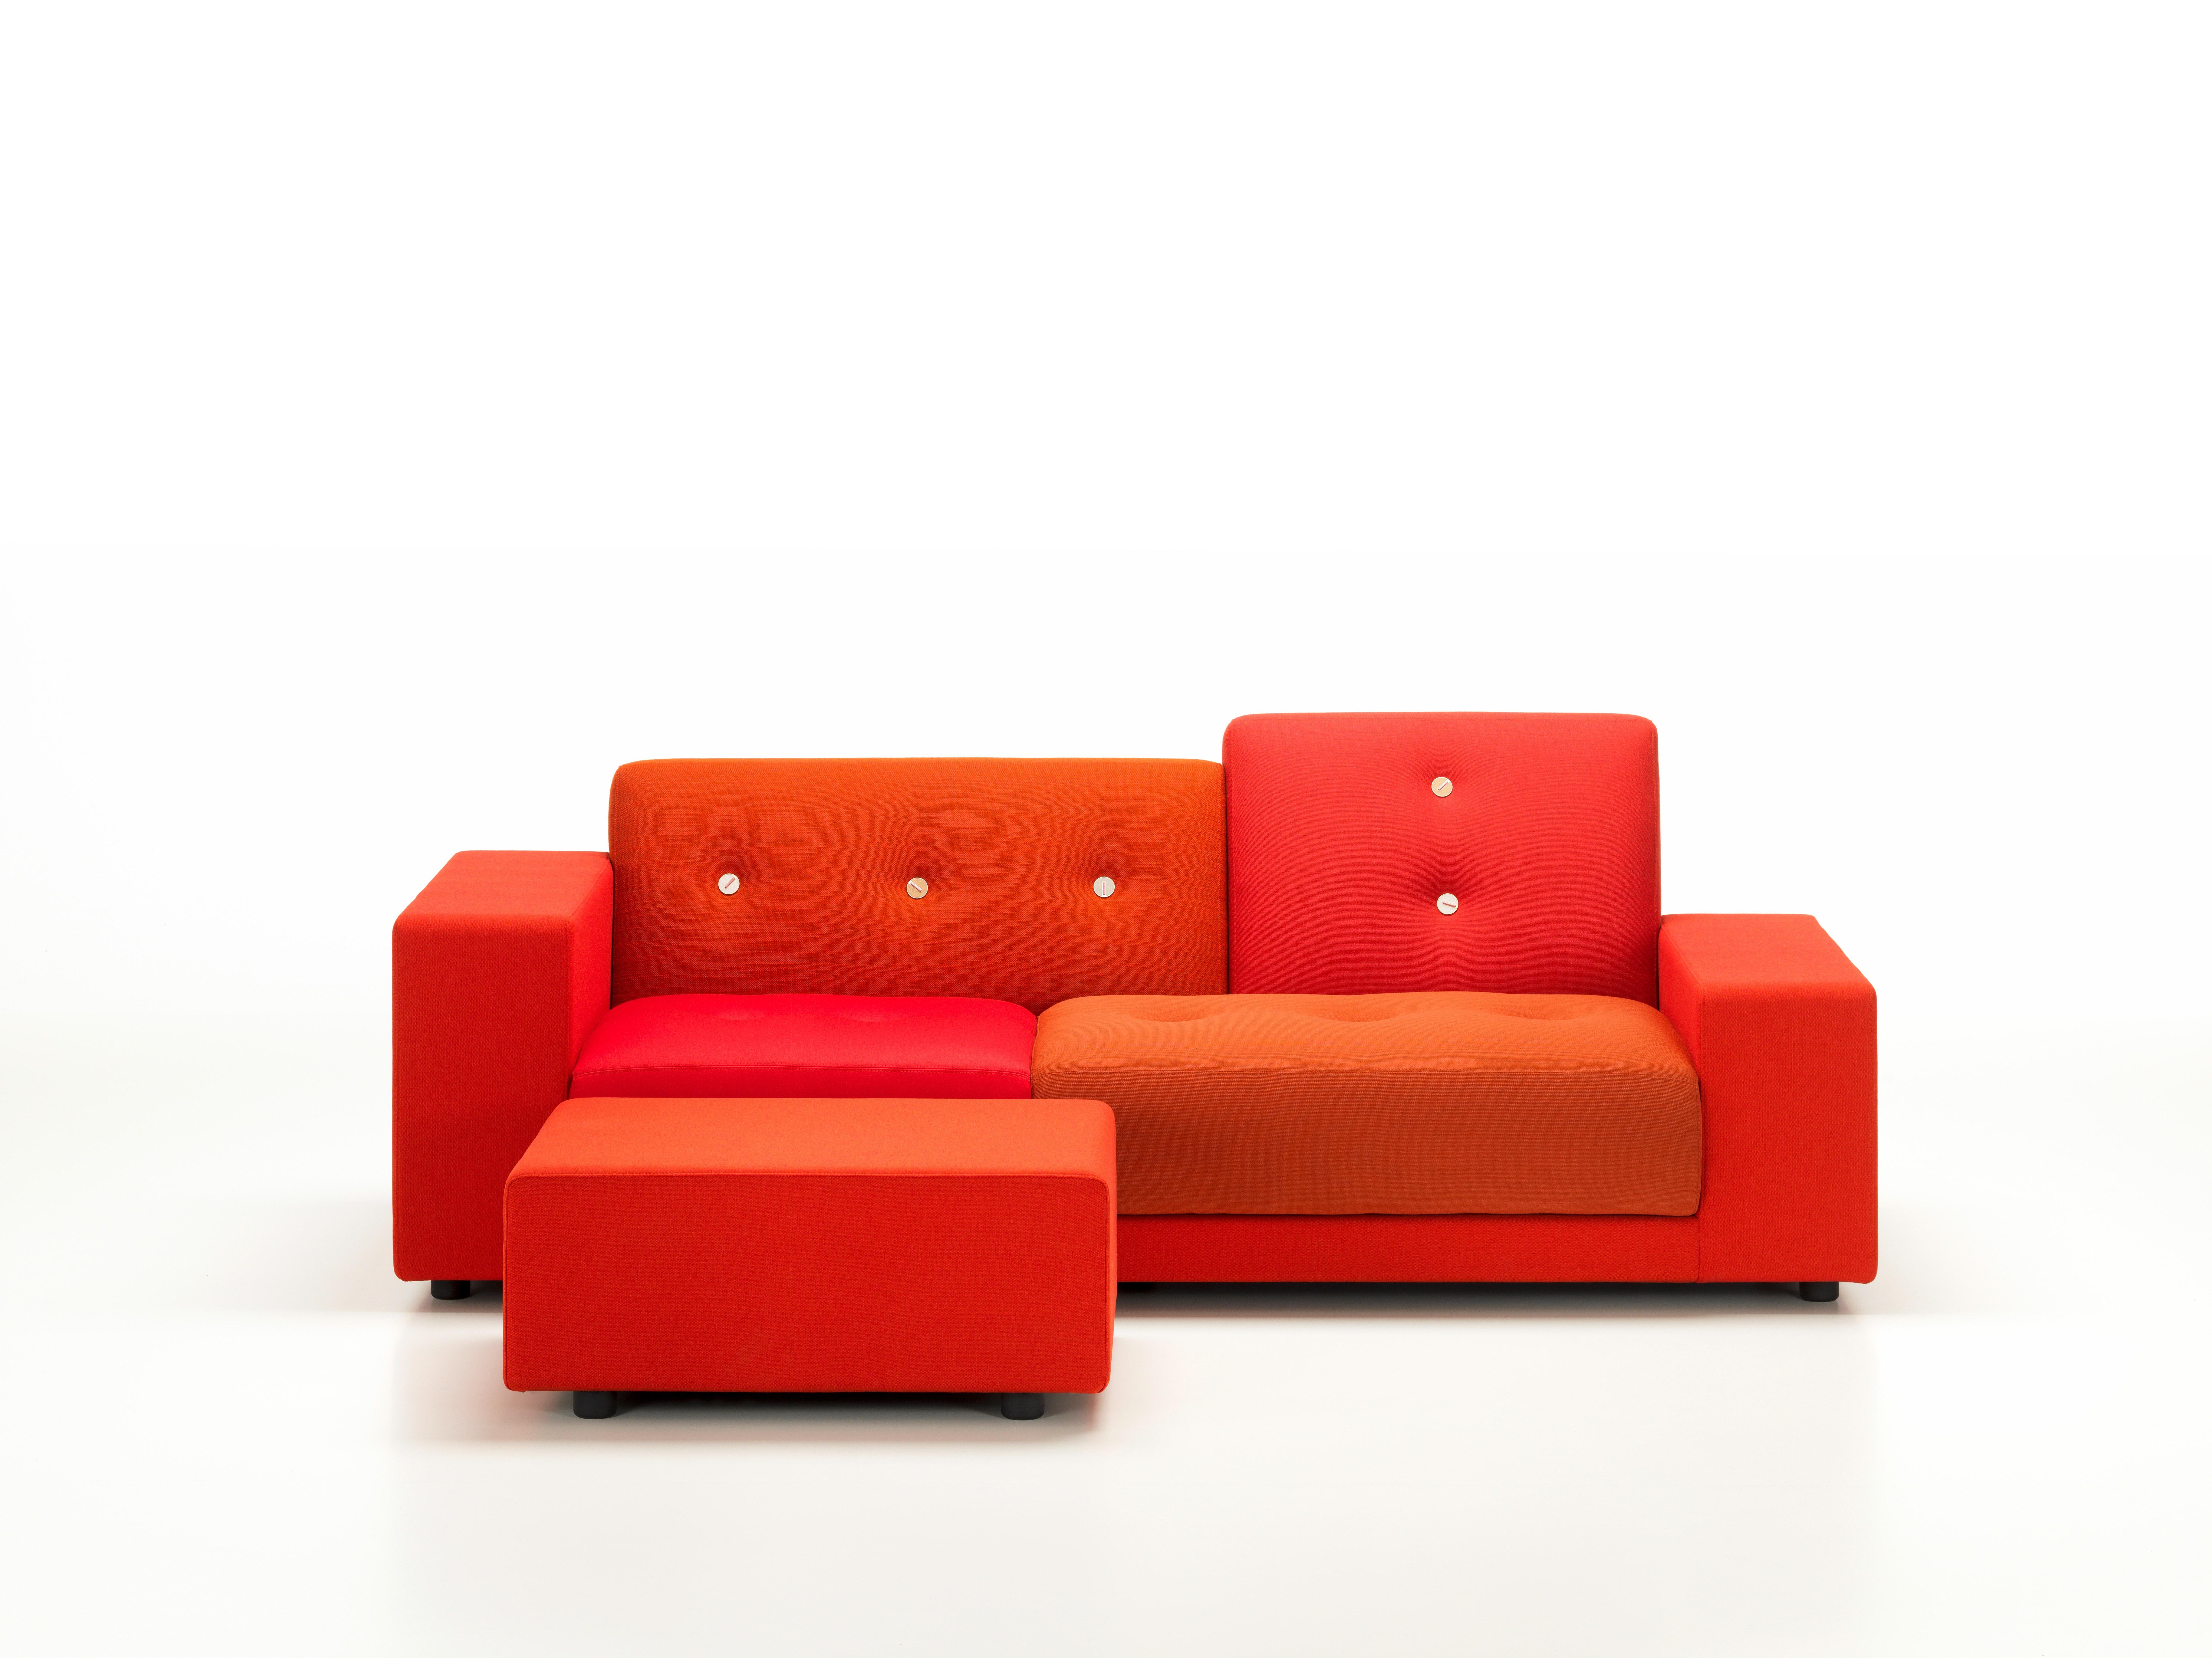 Vitra Polder Compact Sofa in Red Shades by Hella Jongerius (Polster) im Angebot